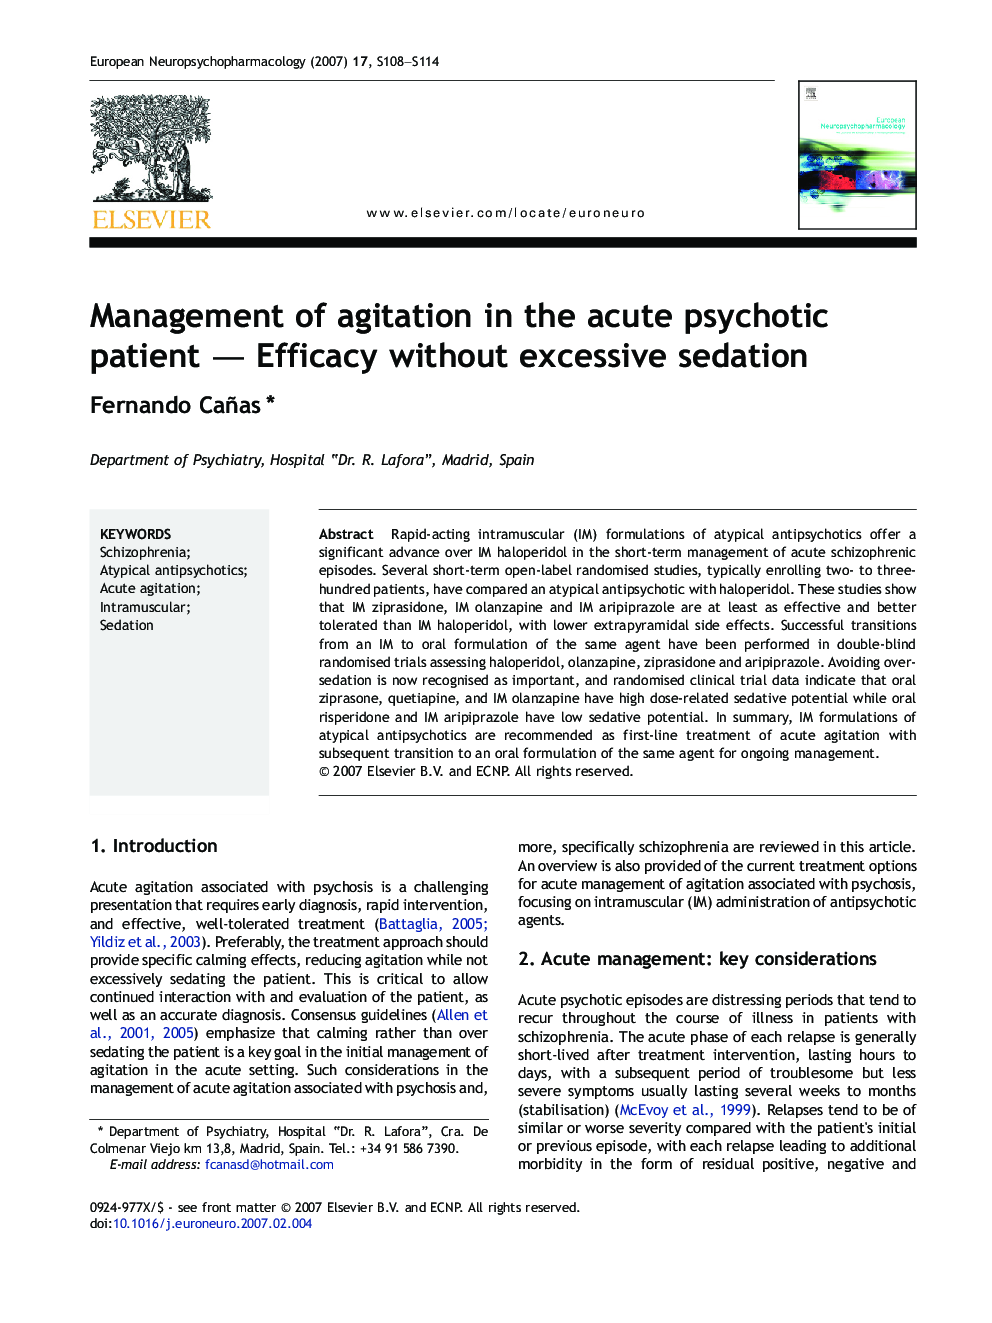 Management of agitation in the acute psychotic patient — Efficacy without excessive sedation